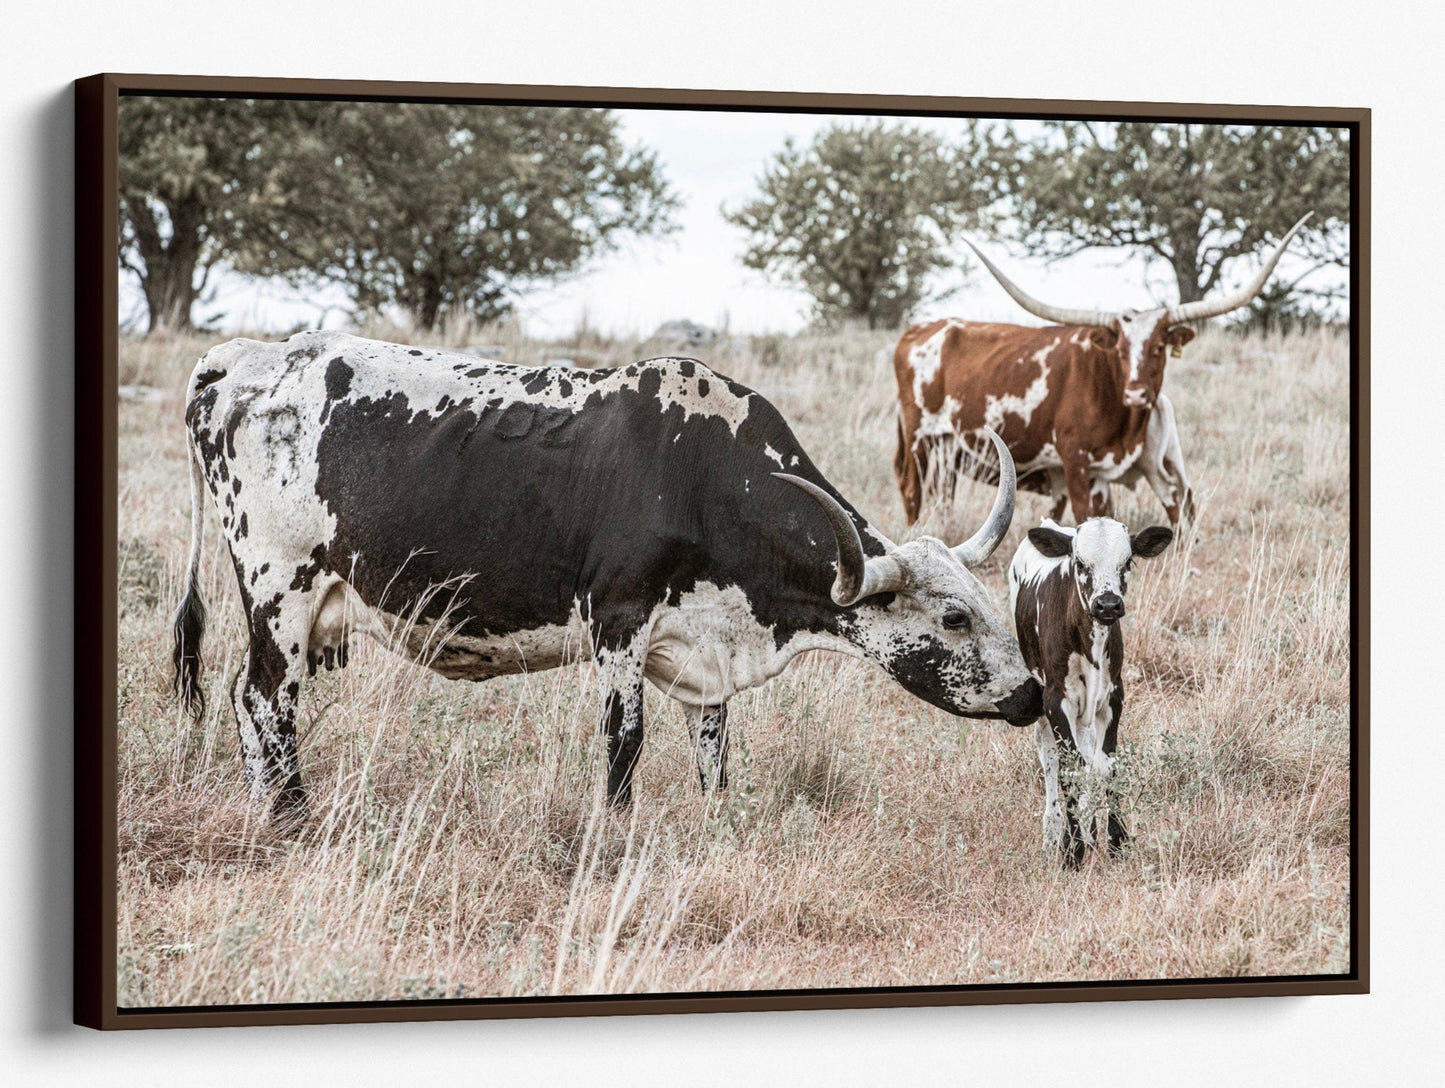 Texas Longhorn Cattle - Cows and Calves Canvas-Walnut Frame / 12 x 18 Inches Wall Art Teri James Photography